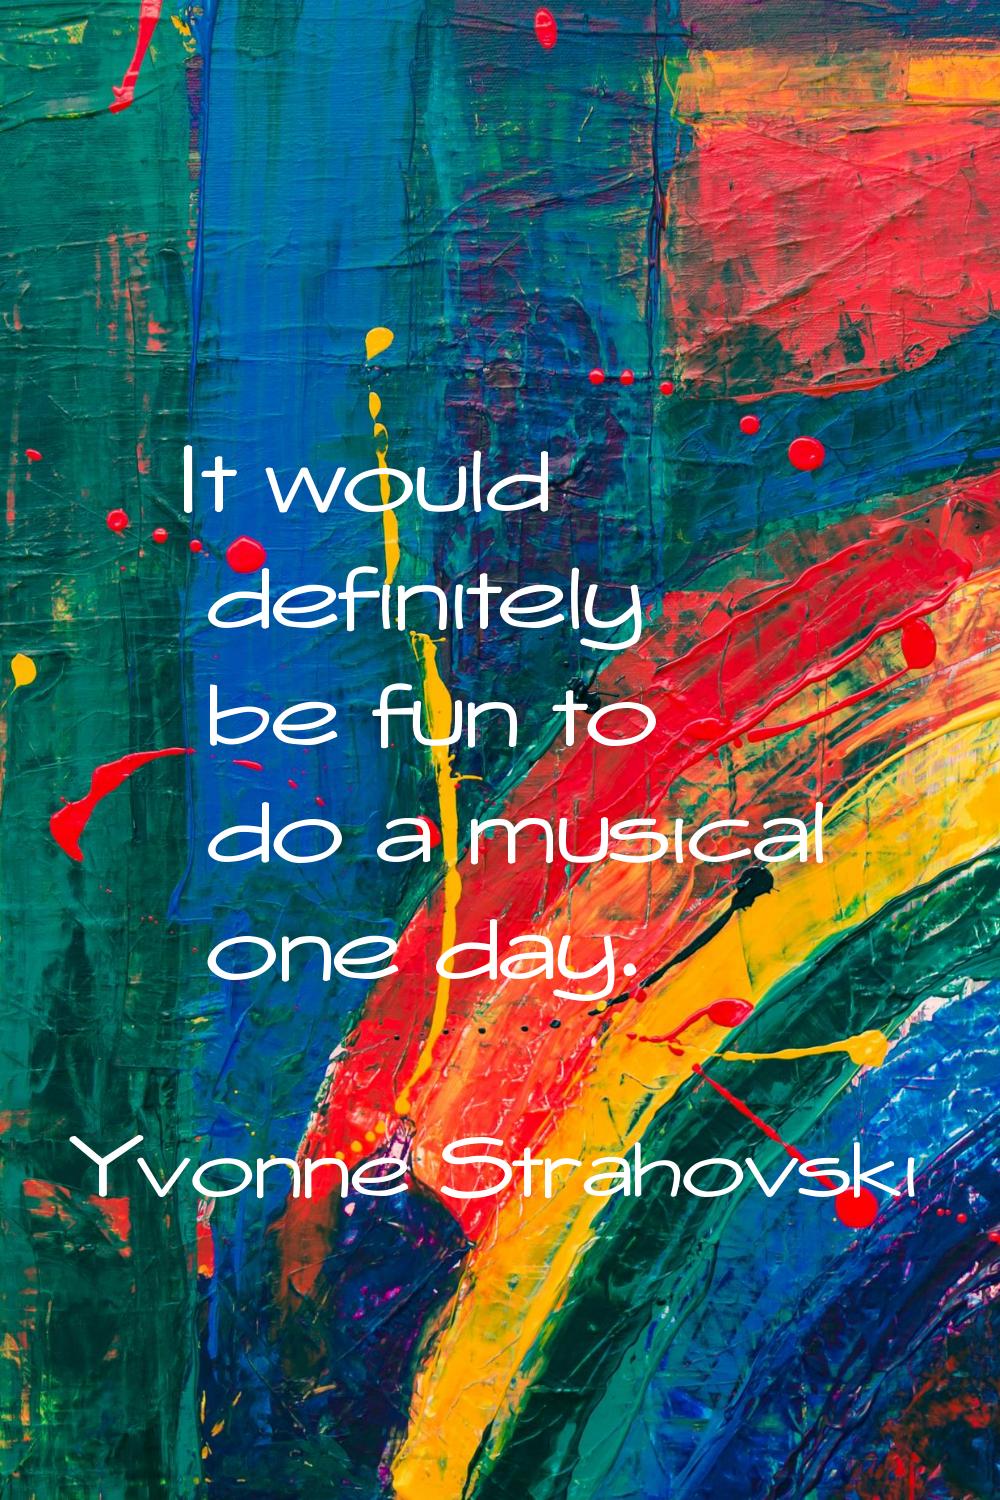 It would definitely be fun to do a musical one day.